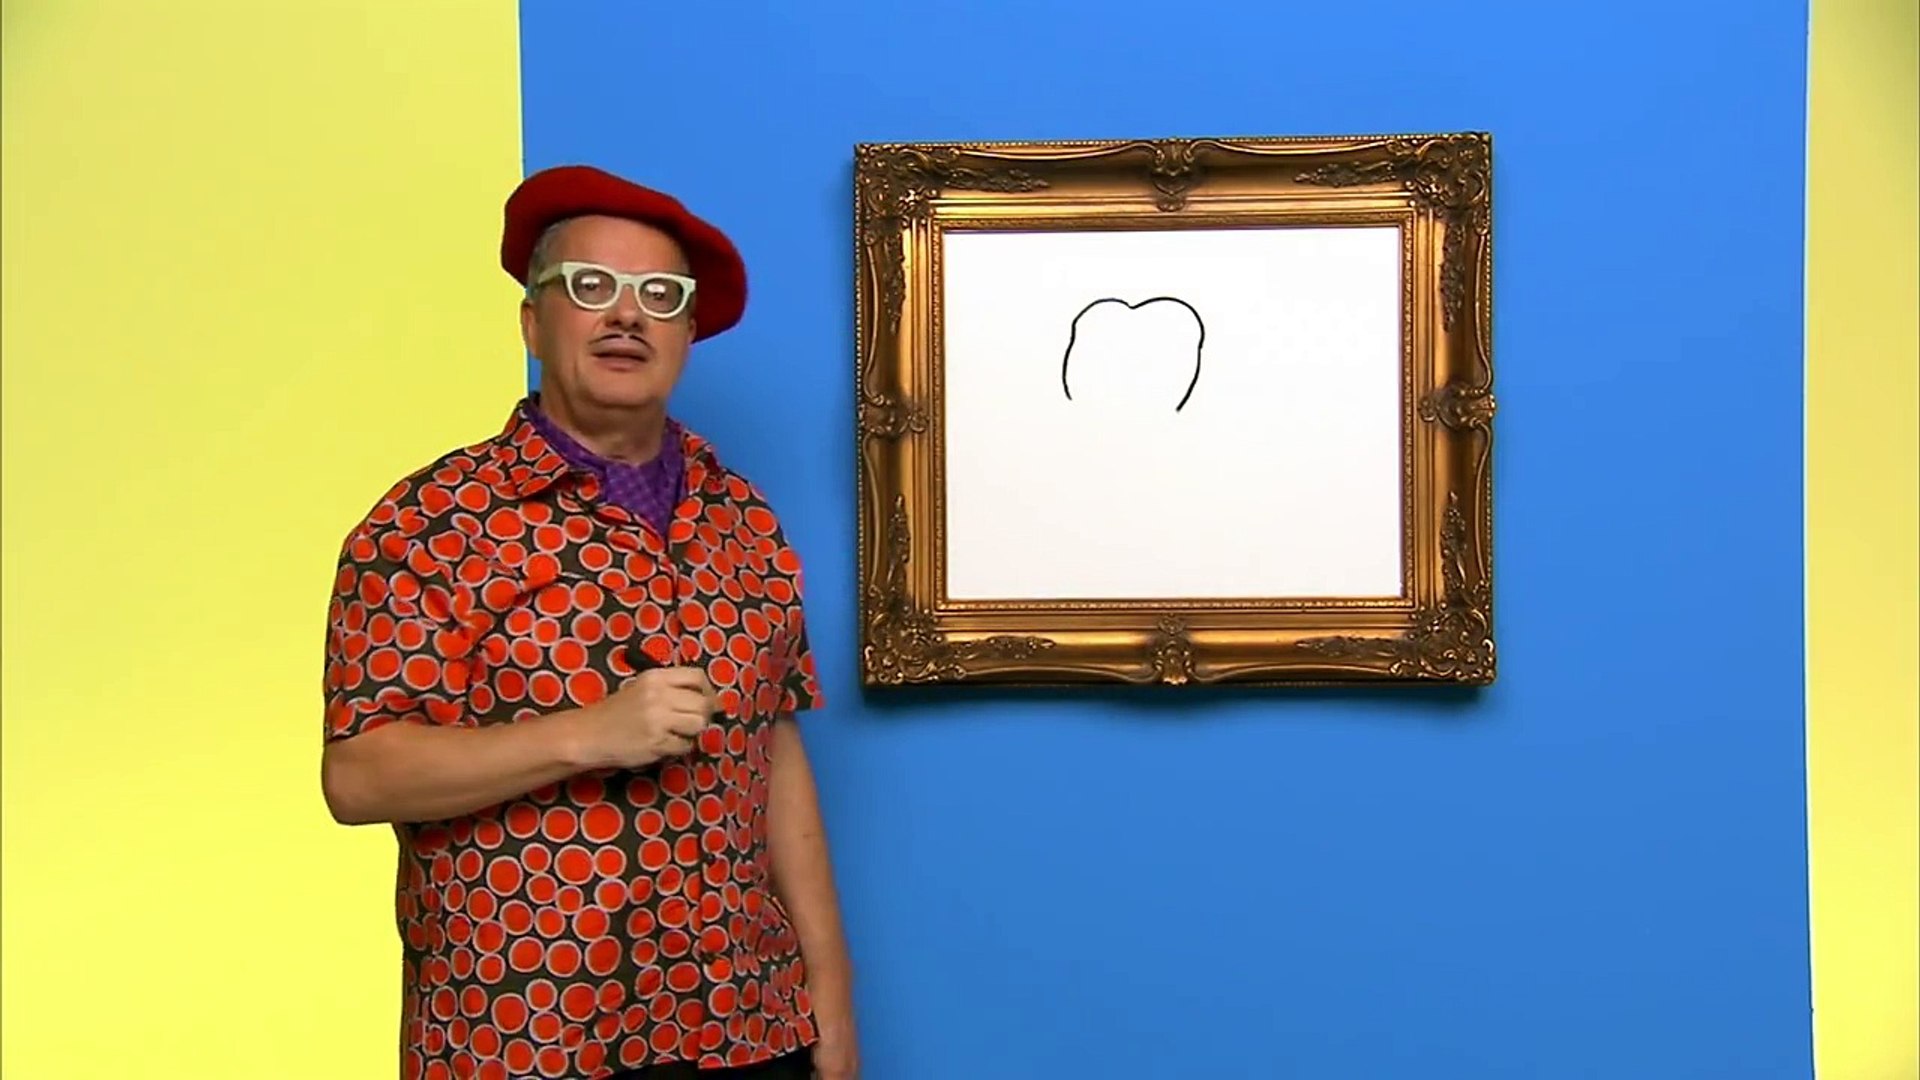 Marks Magic Pictures Tooth Yo Gabba Gabba Dailymotion Video Mark's magic pictures, featuring mark mothersbaugh, drawing simple pictures that often come alive at the end of the segment. marks magic pictures tooth yo gabba gabba